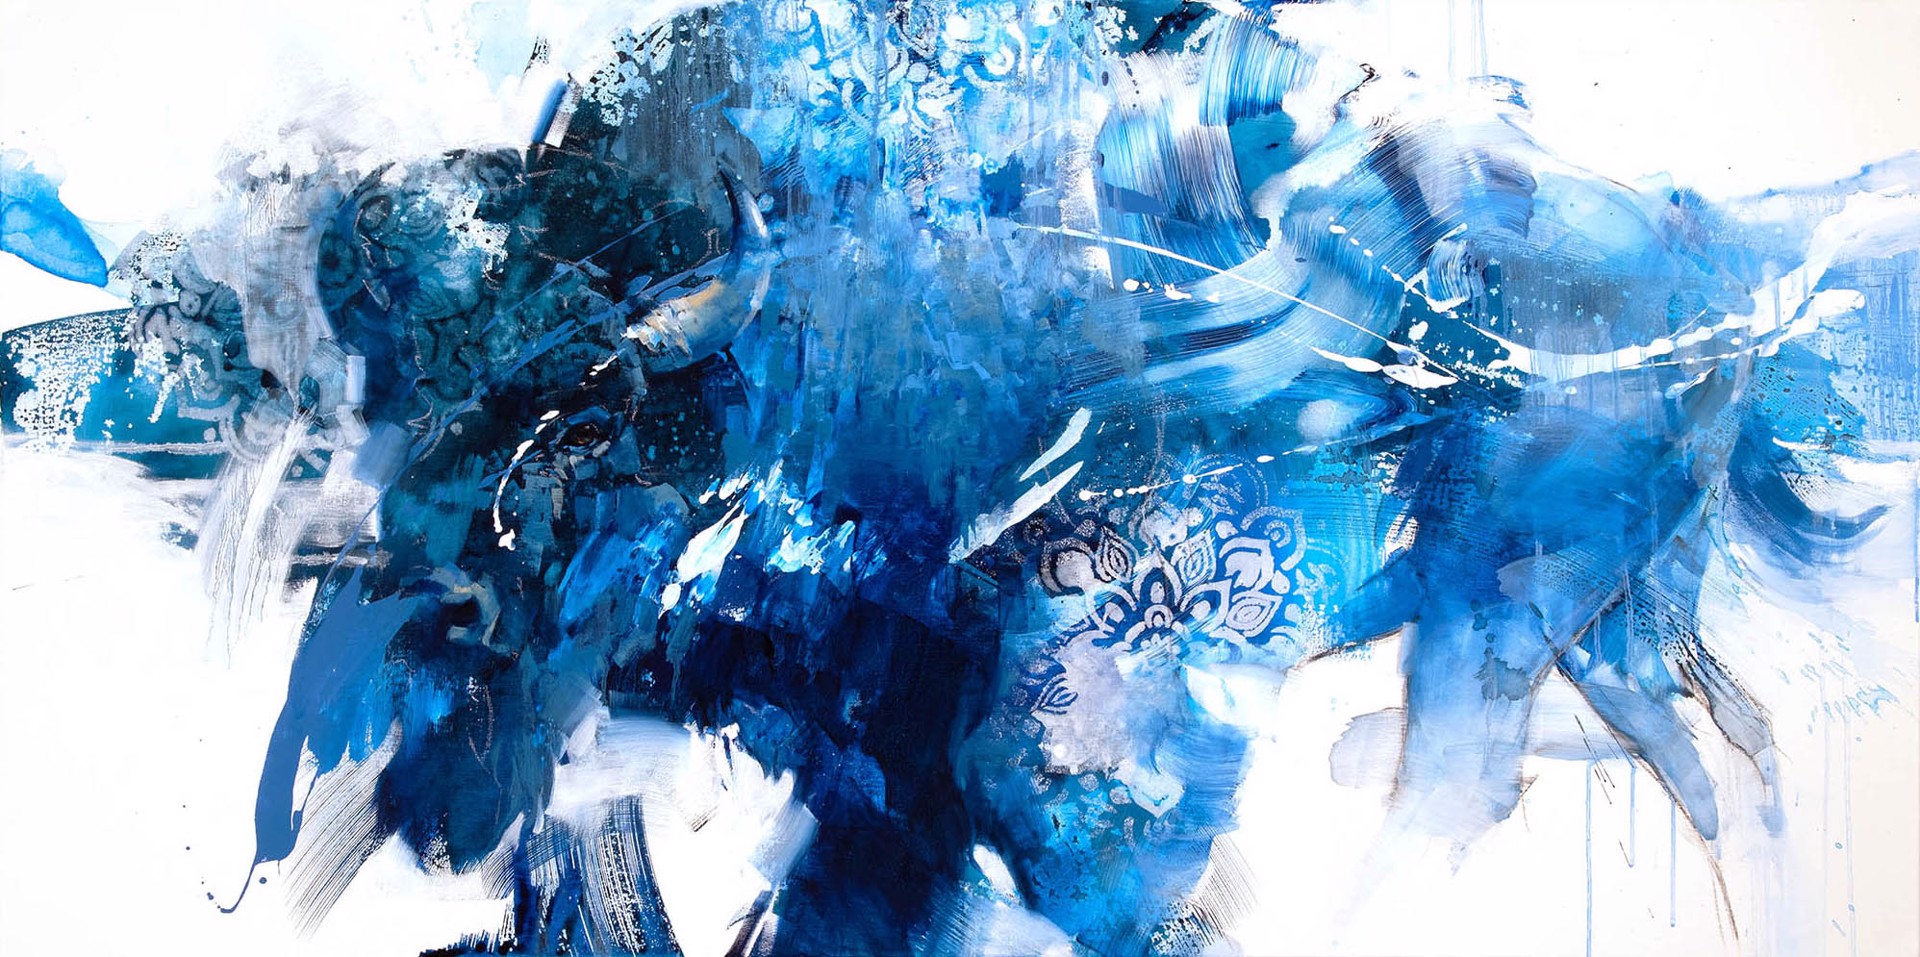 A Contemporary Mixed Media Painting Of An Abstract Blue Bison By Julie Chapman Available At Gallery Wild